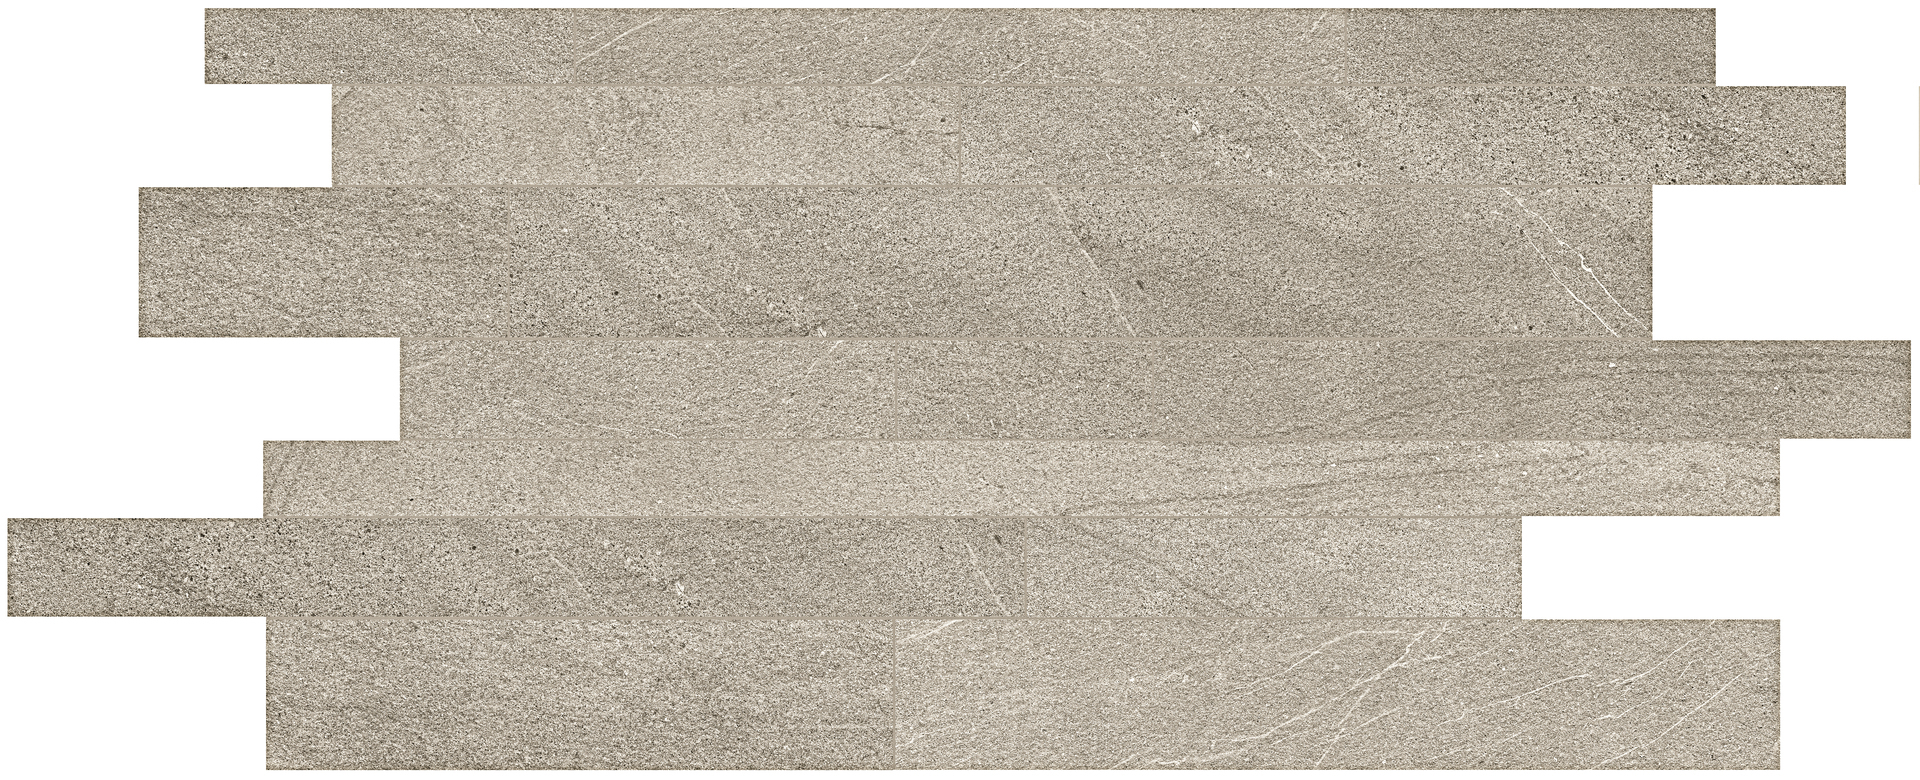 Lea Nextone Taupe Naturale – Antibacterial Muretto LG9NX02 30x60cm rectified 9,5mm